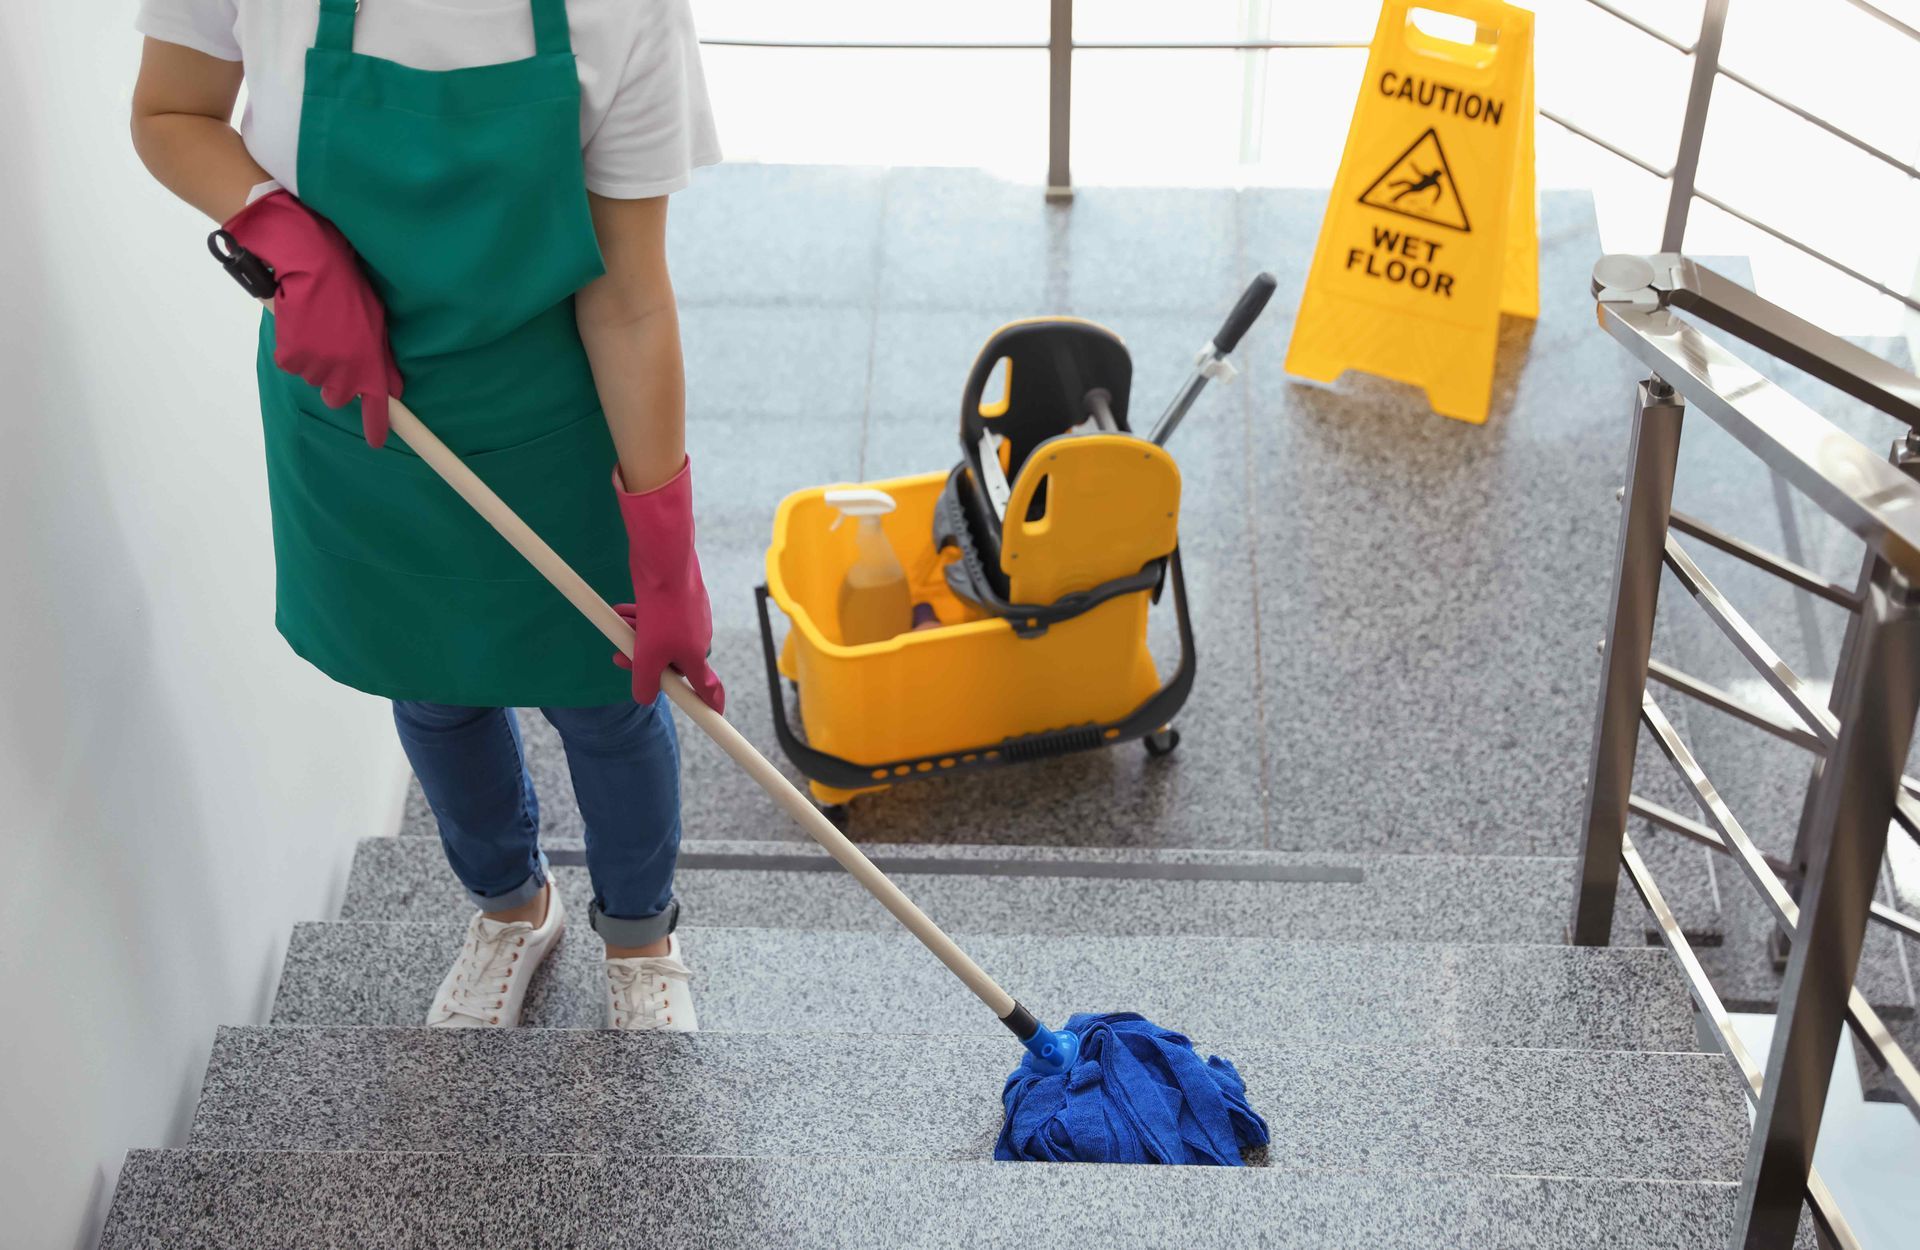 A woman is cleaning a wet floor with a mop